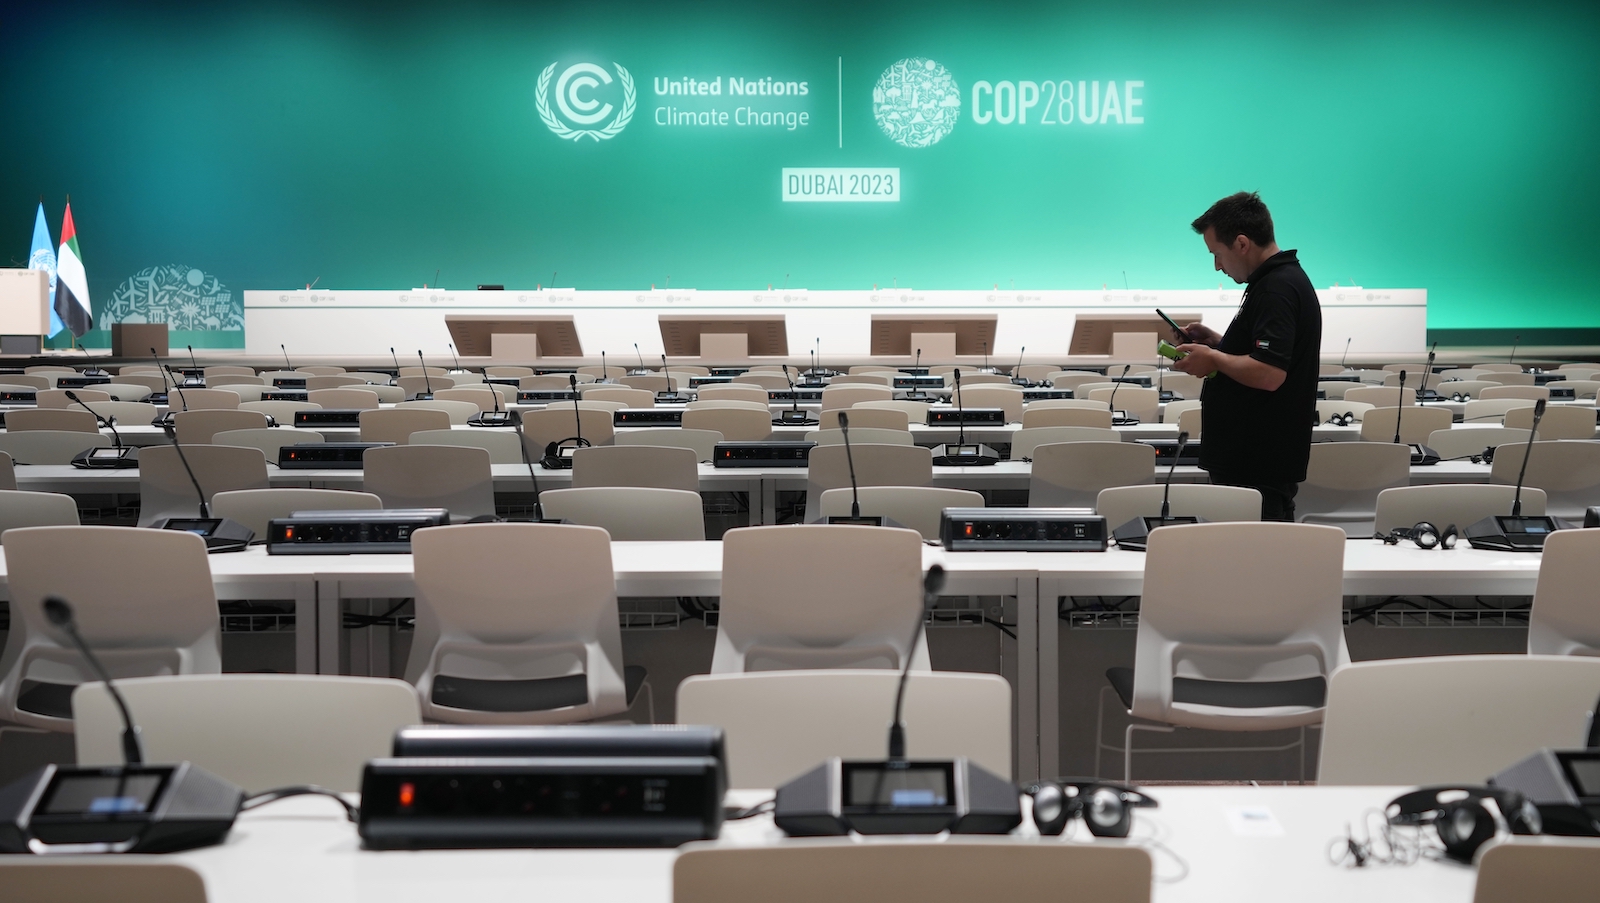 A worker sets up in a room a full of empty chairs and microphones ahead of the COP28 U.N. Climate Summit, Wednesday, Nov. 29, 2023, in Dubai, United Arab Emirates.